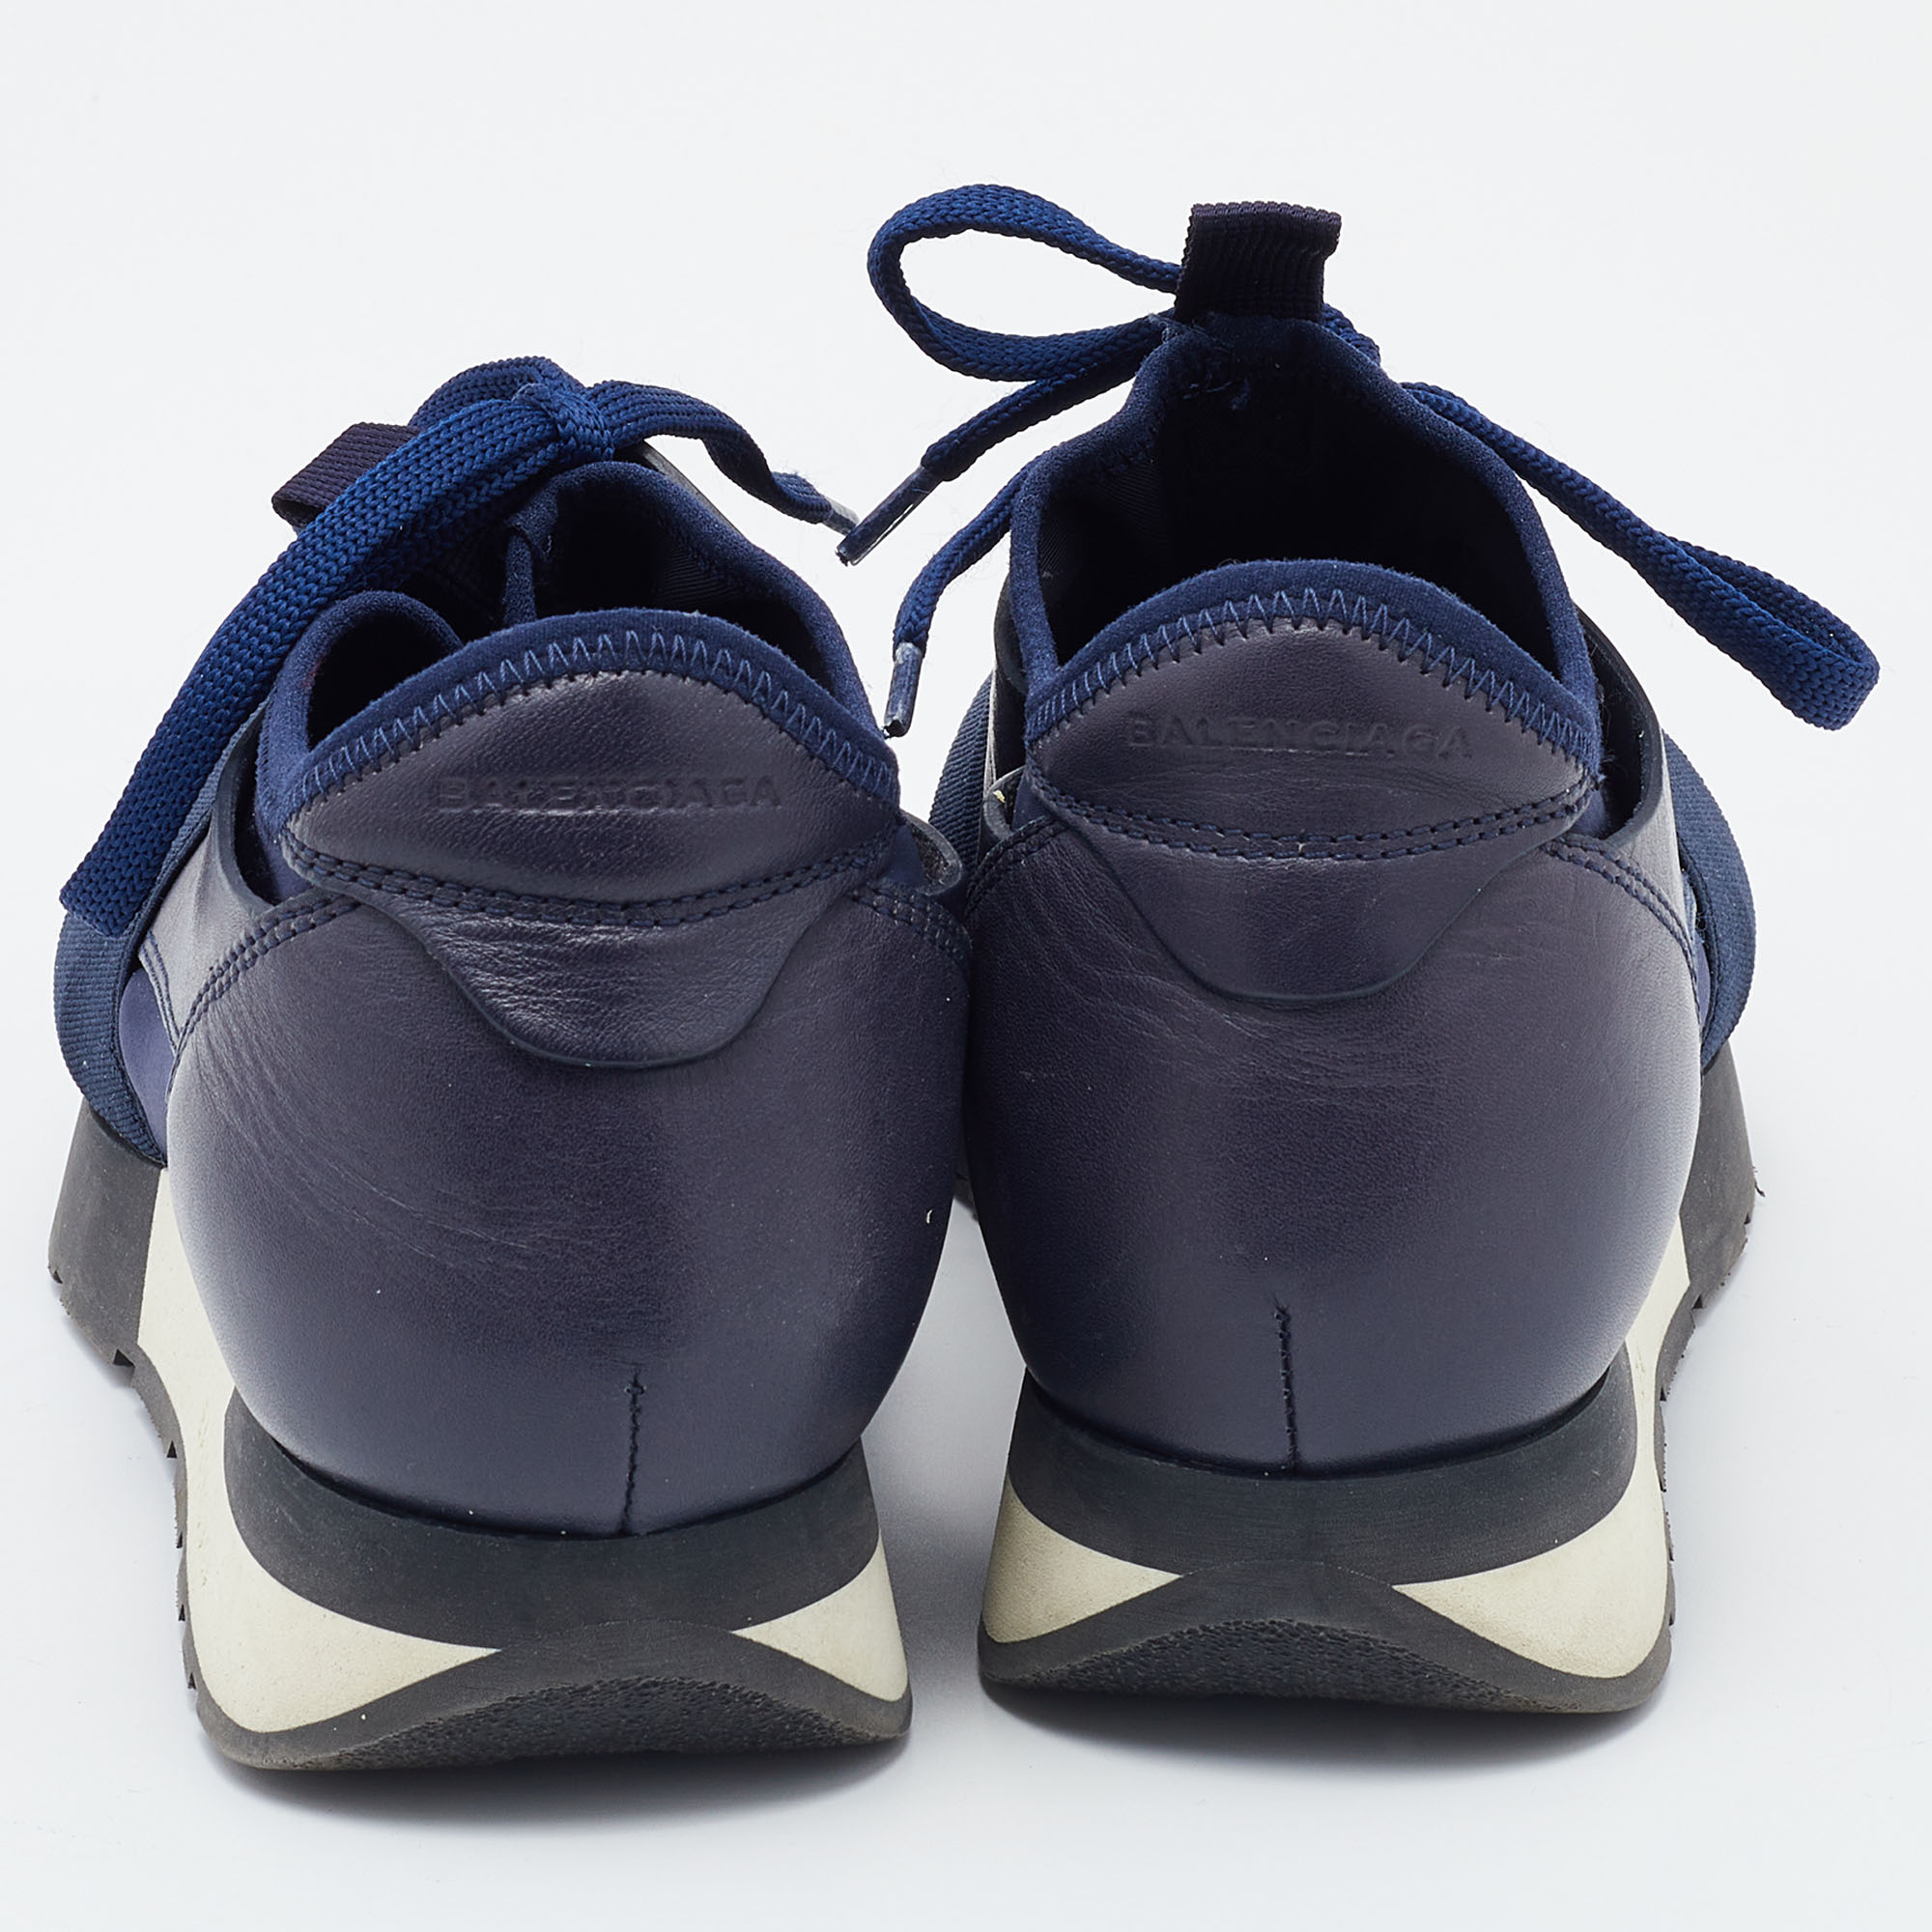 Balenciaga Blue Leather And Satin Race Runner Sneakers Size 37